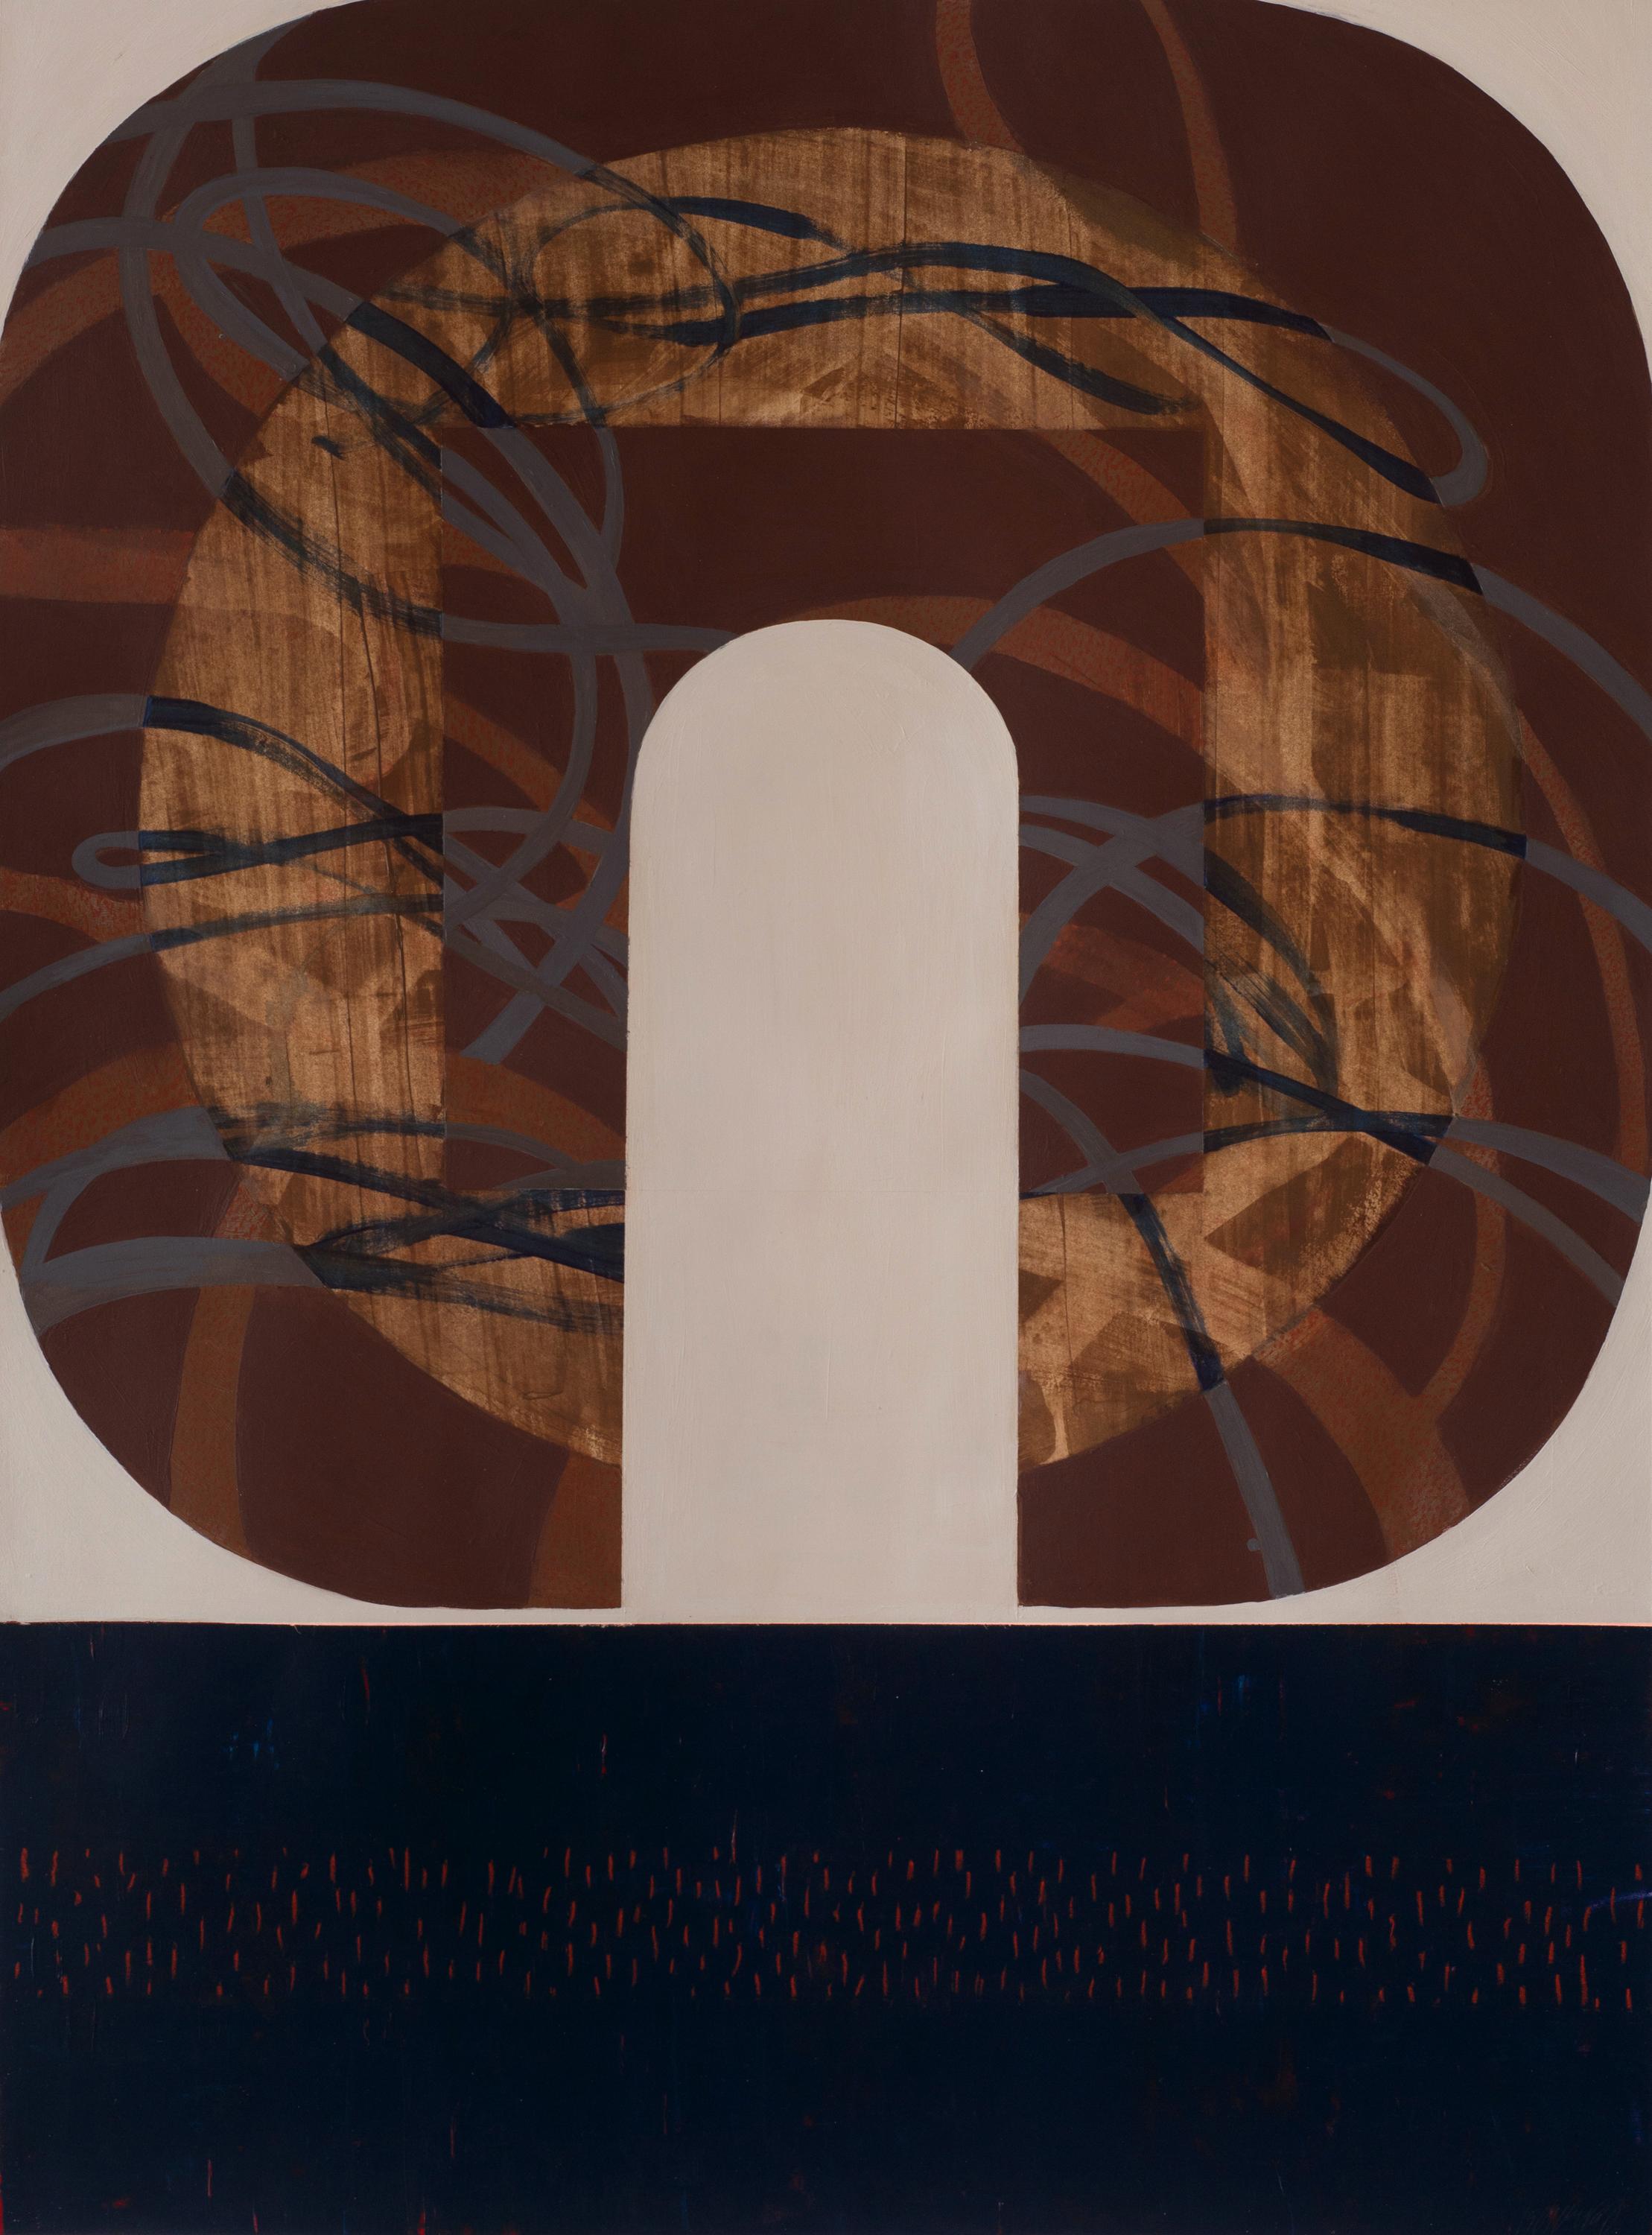 Kazaan Viveiros Abstract Painting - Crescent Web, Earth tones, geometric abstract painting on paper, unframed